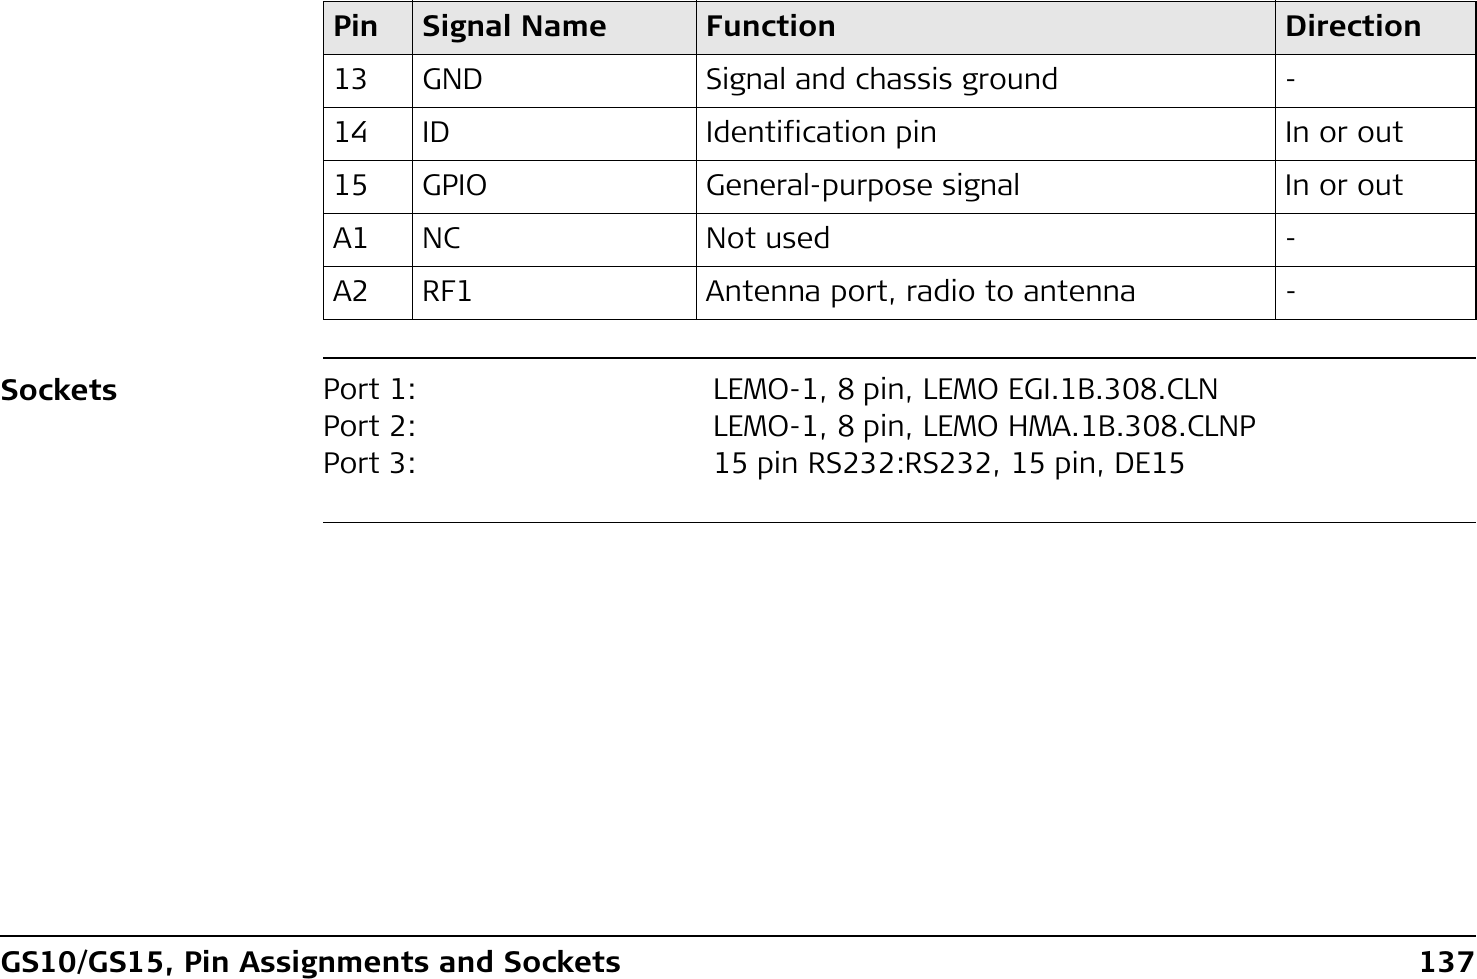 GS10/GS15, Pin Assignments and Sockets 137Sockets13 GND Signal and chassis ground -14 ID Identification pin In or out15 GPIO General-purpose signal In or outA1 NC Not used -A2 RF1 Antenna port, radio to antenna -Pin Signal Name Function DirectionPort 1: LEMO-1, 8 pin, LEMO EGI.1B.308.CLNPort 2: LEMO-1, 8 pin, LEMO HMA.1B.308.CLNPPort 3: 15 pin RS232:RS232, 15 pin, DE15